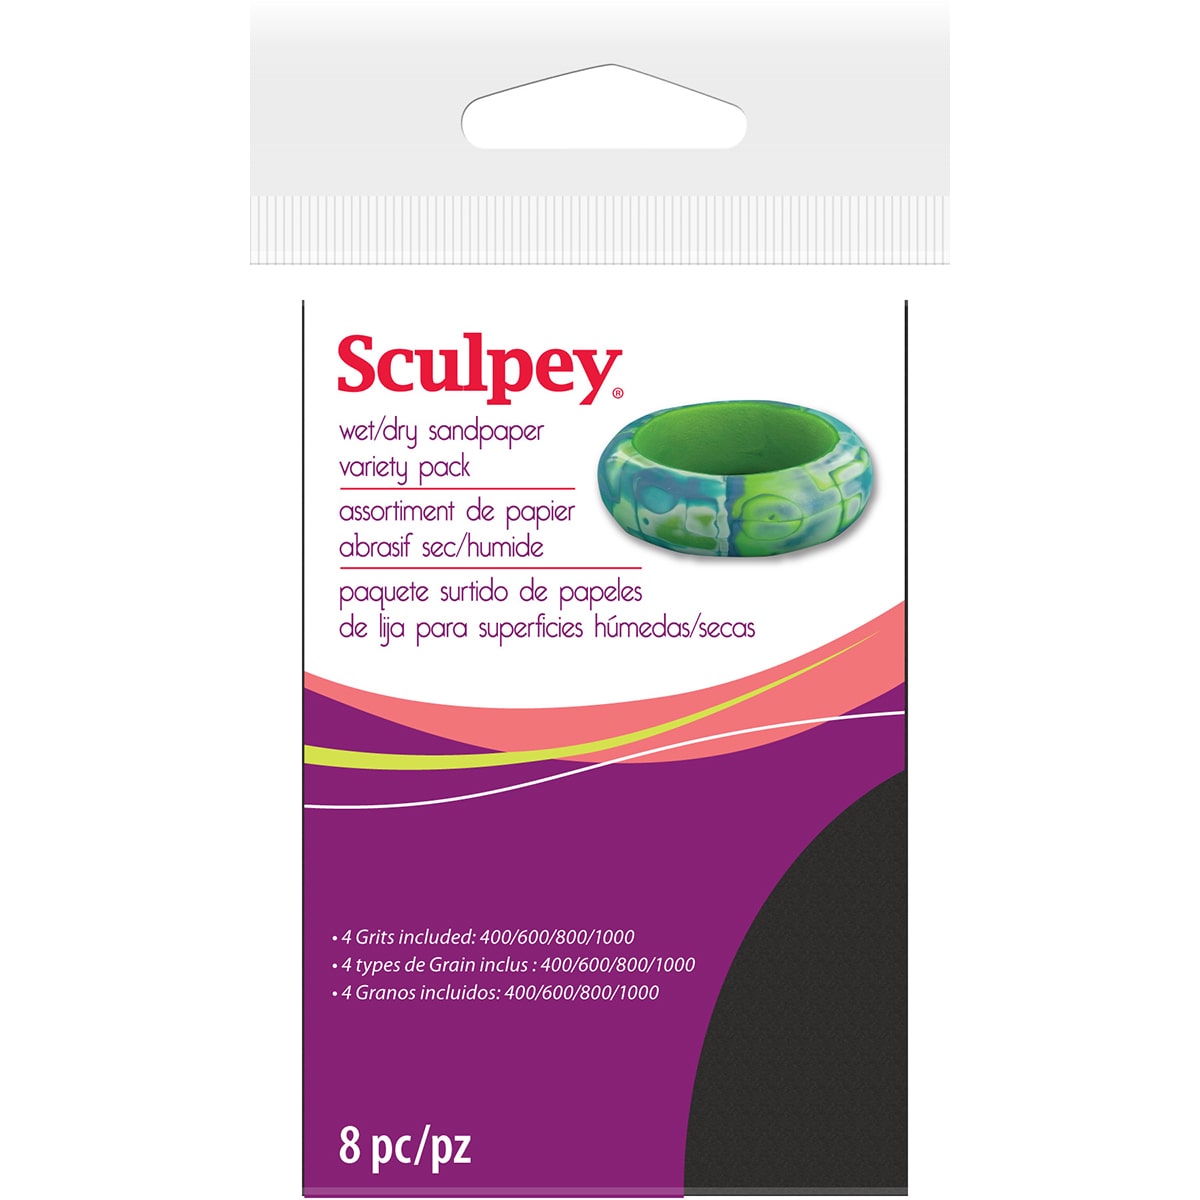 Sculpey Wet/Dry Sandpaper Variety Pack, 8pc, 2.75" x 4.5" - image 2 of 2